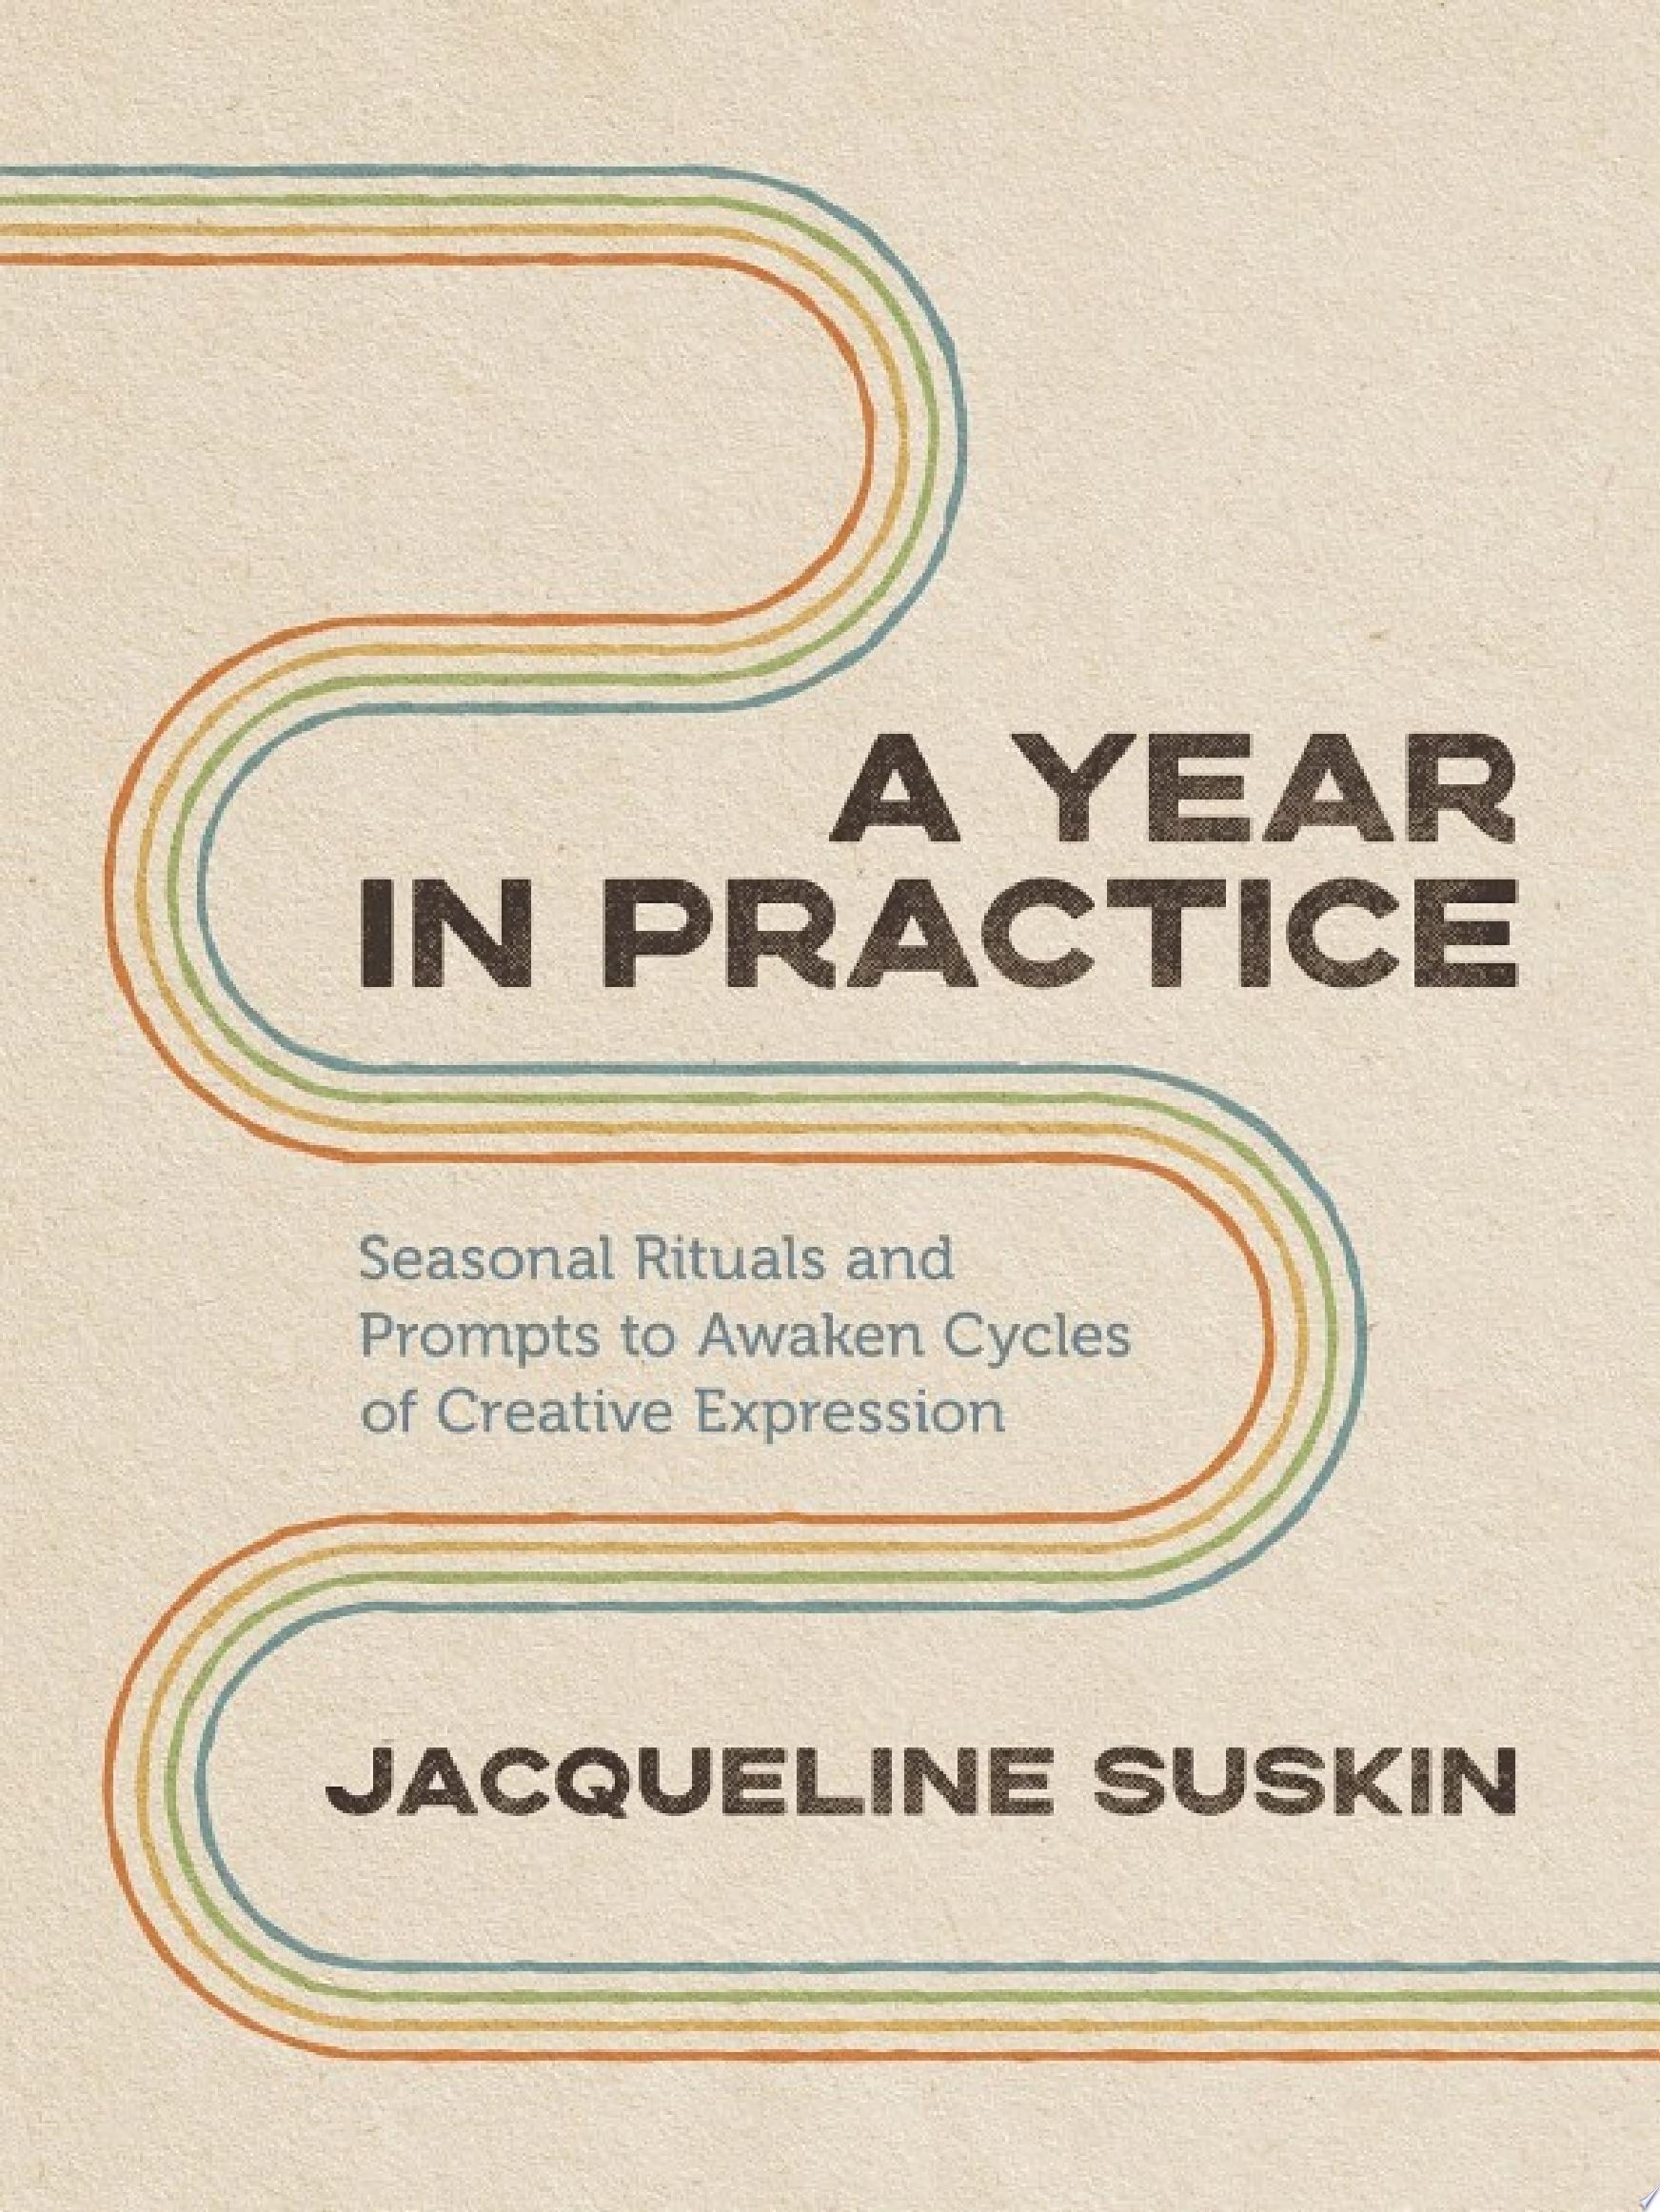 Image for "A Year in Practice"